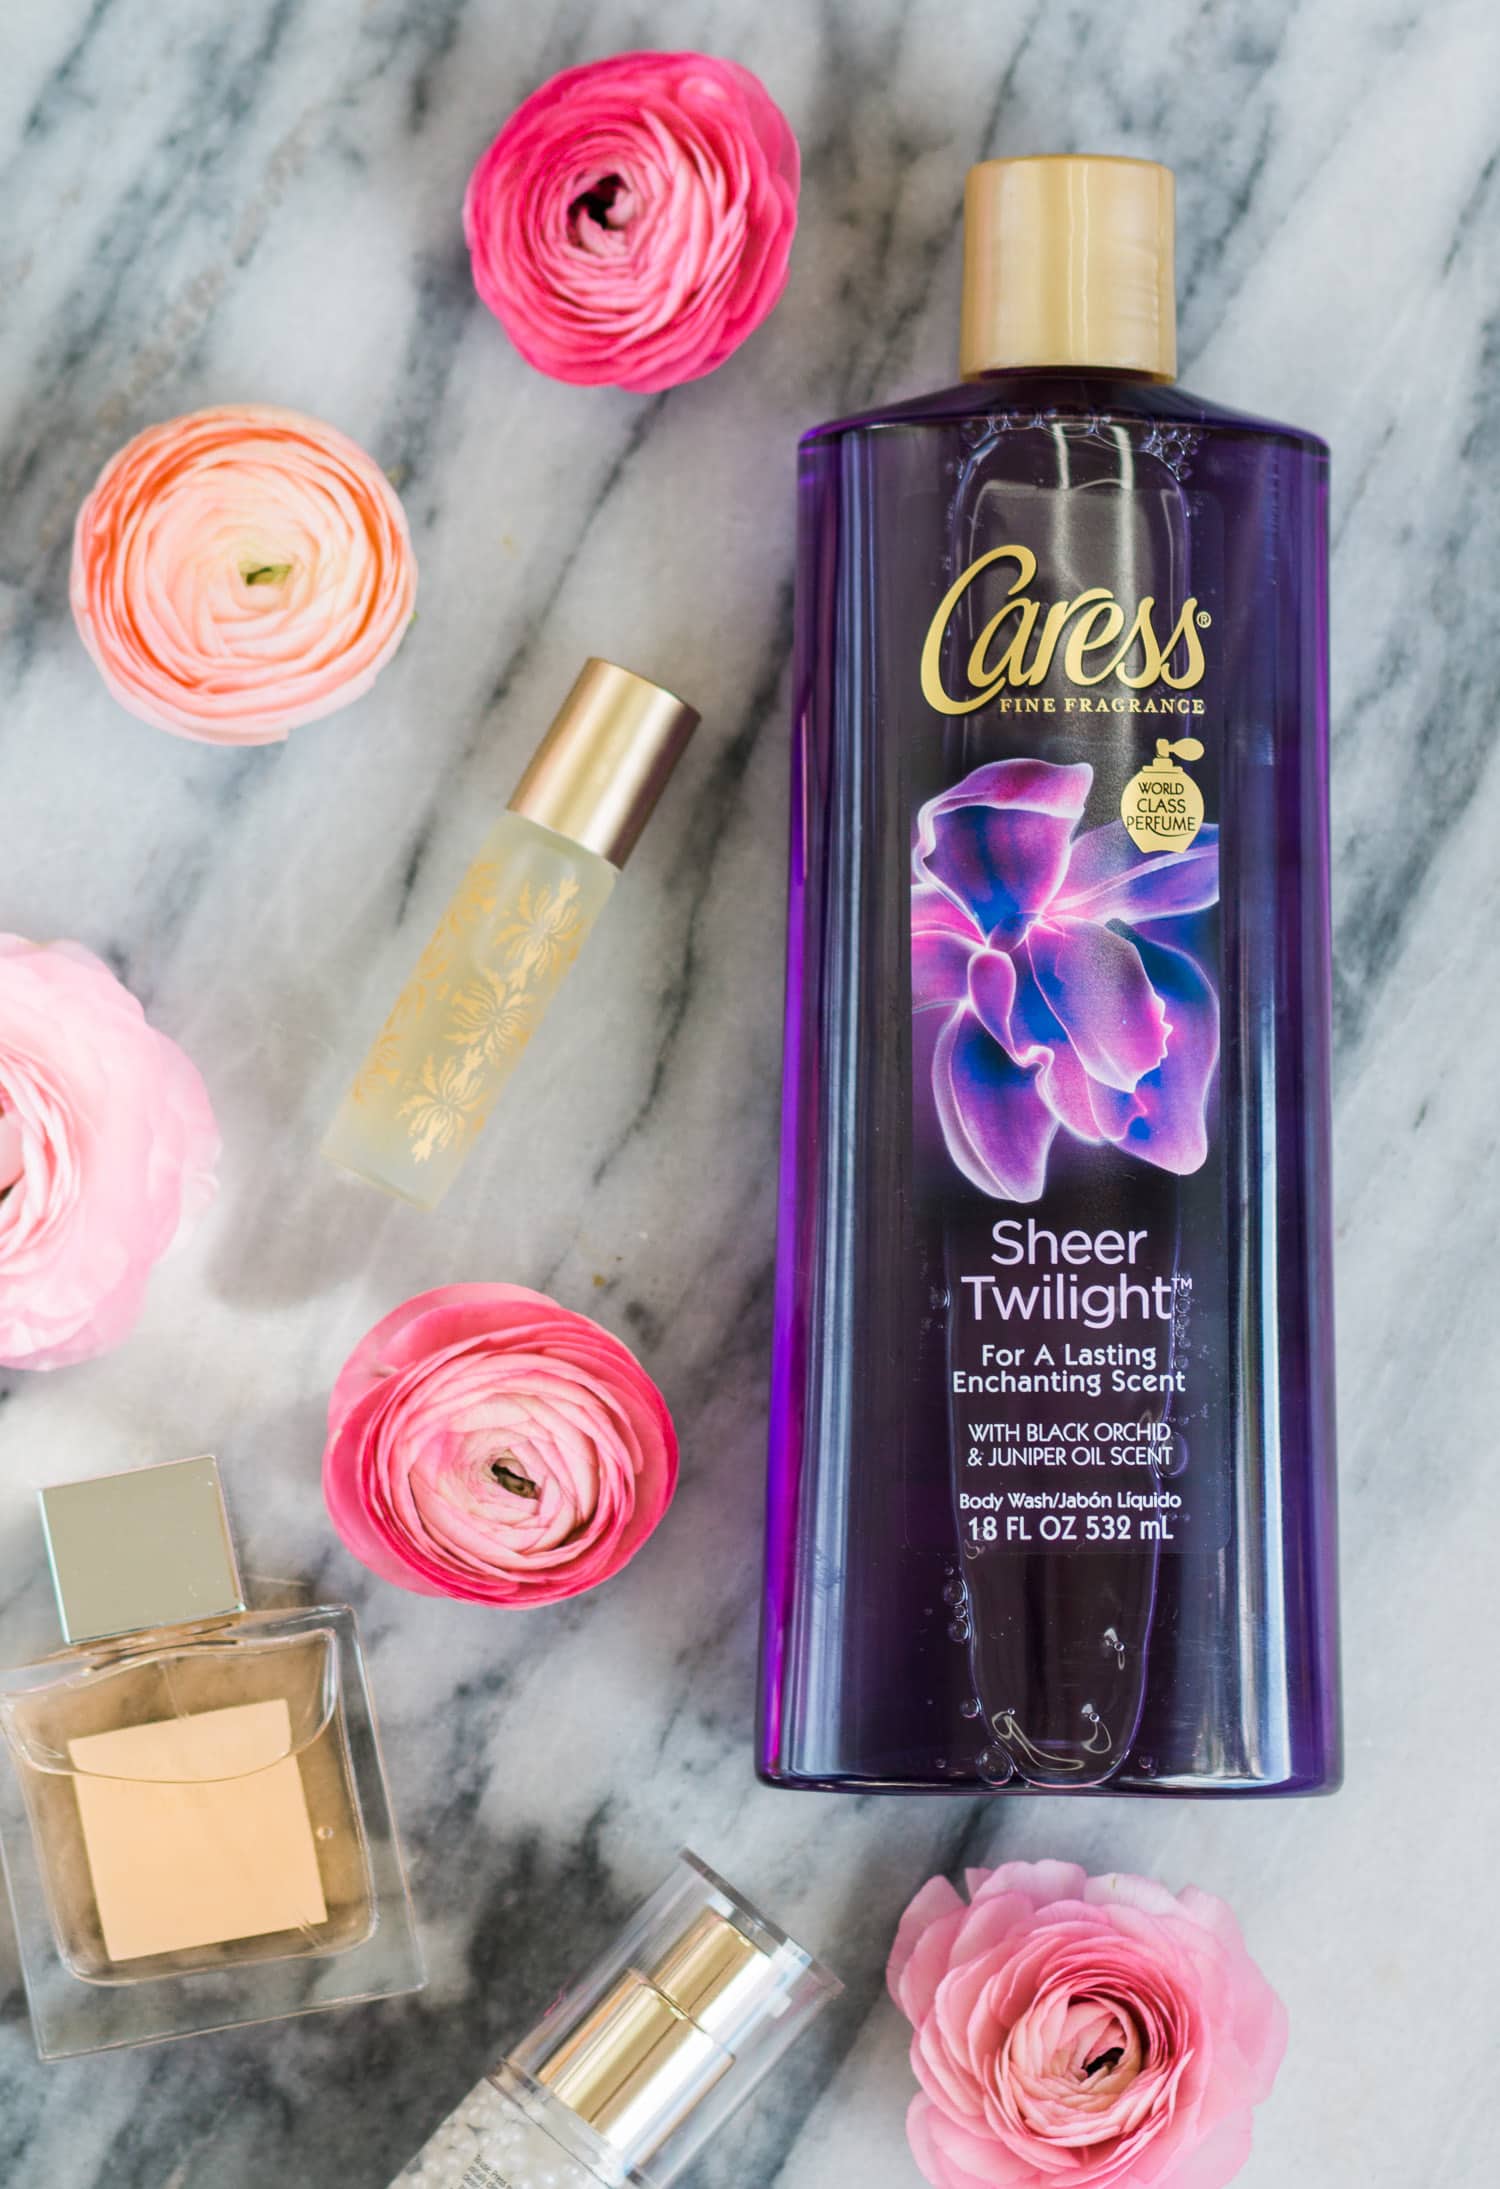 The best body wash for every skin type! | The best drugstore body wash from Caress + a giveaway to win a $250 Walmart gift card! #MoreThanOneThing sponsored by Walmart | @walmart | Caress Sheer Twilight body wash | affordable beauty, drugstore beauty, beauty review, bath and body products, shower gel, bath products, shower products, best of beauty, beauty under $5, best of beauty under $5, Florida beauty blogger Ashley Brooke Nicholas